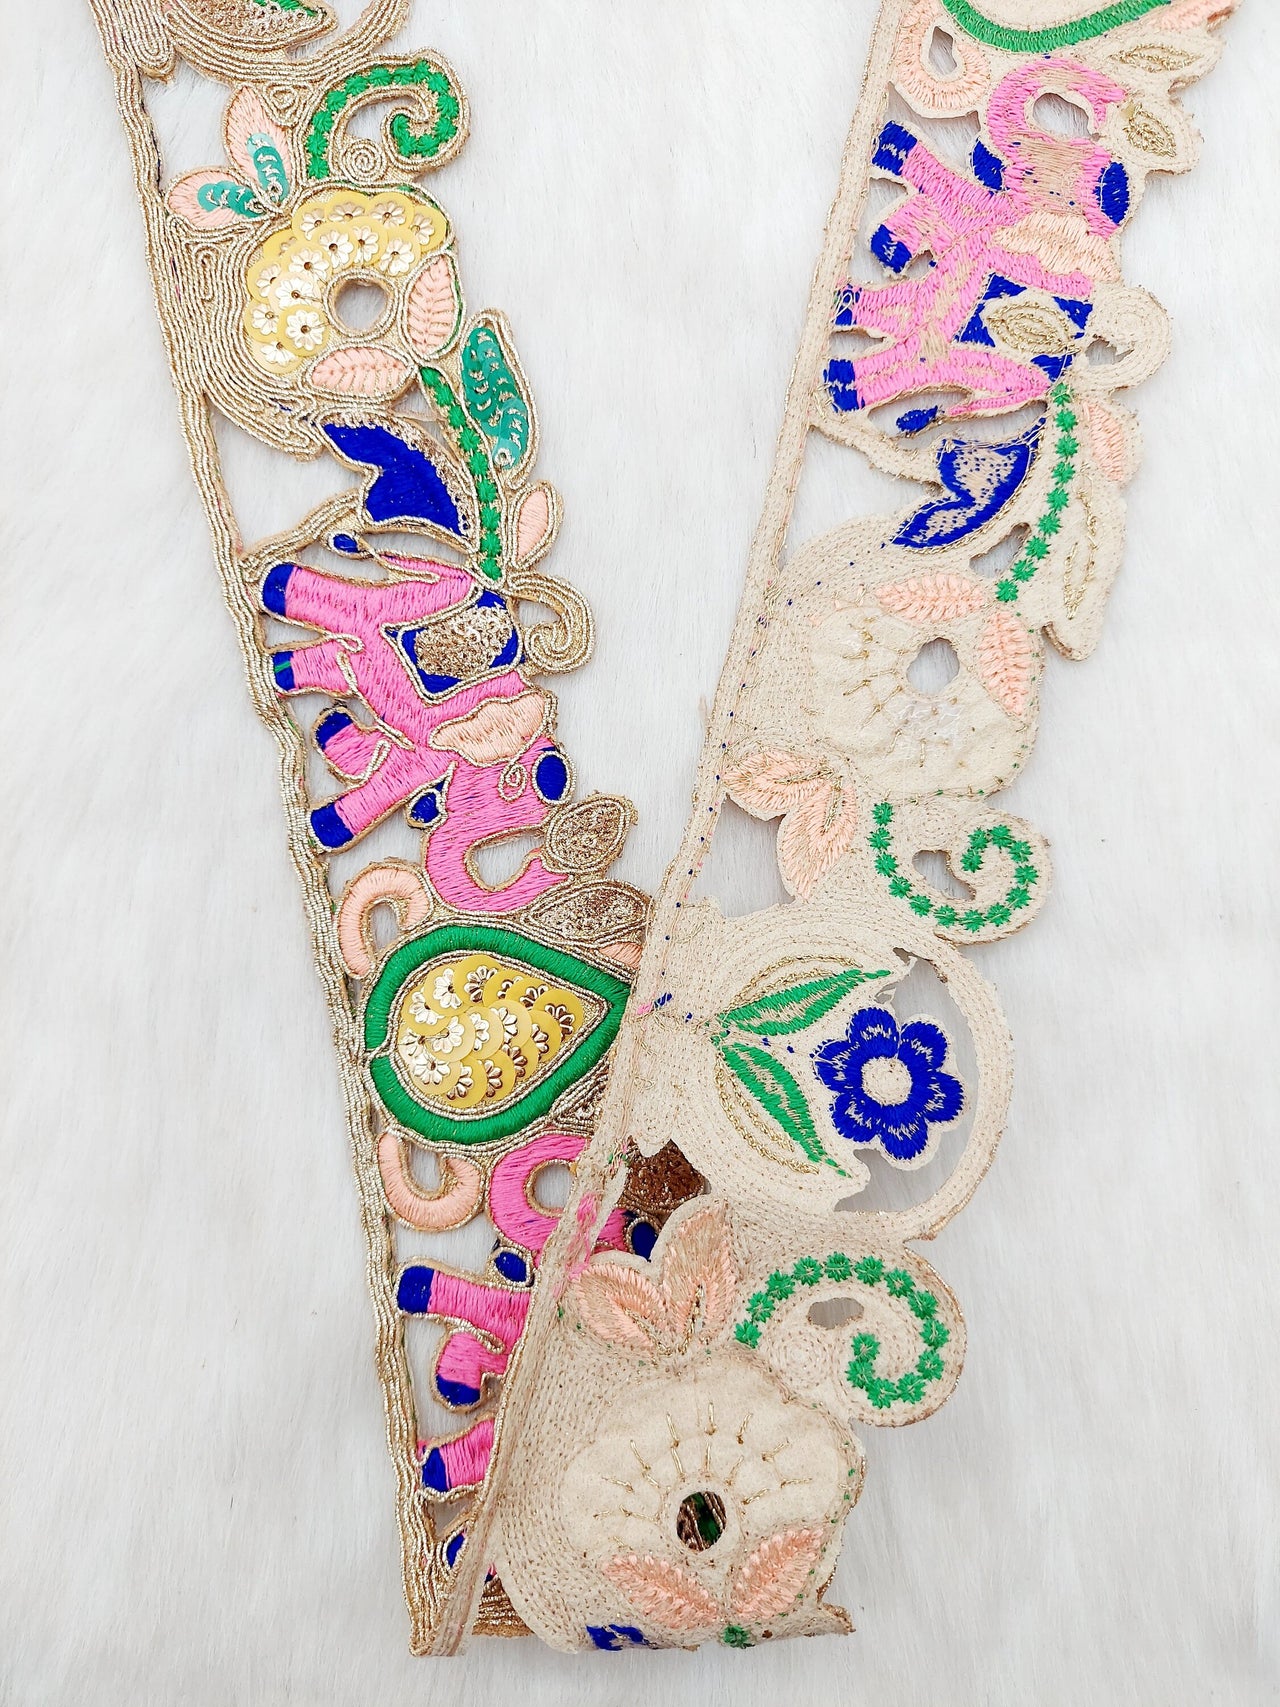 Cutwork Lace Trim With Intricate Hand Embroidered Elephants In Pink and Zardozi Embroidery, Floral Trims, Sari Border